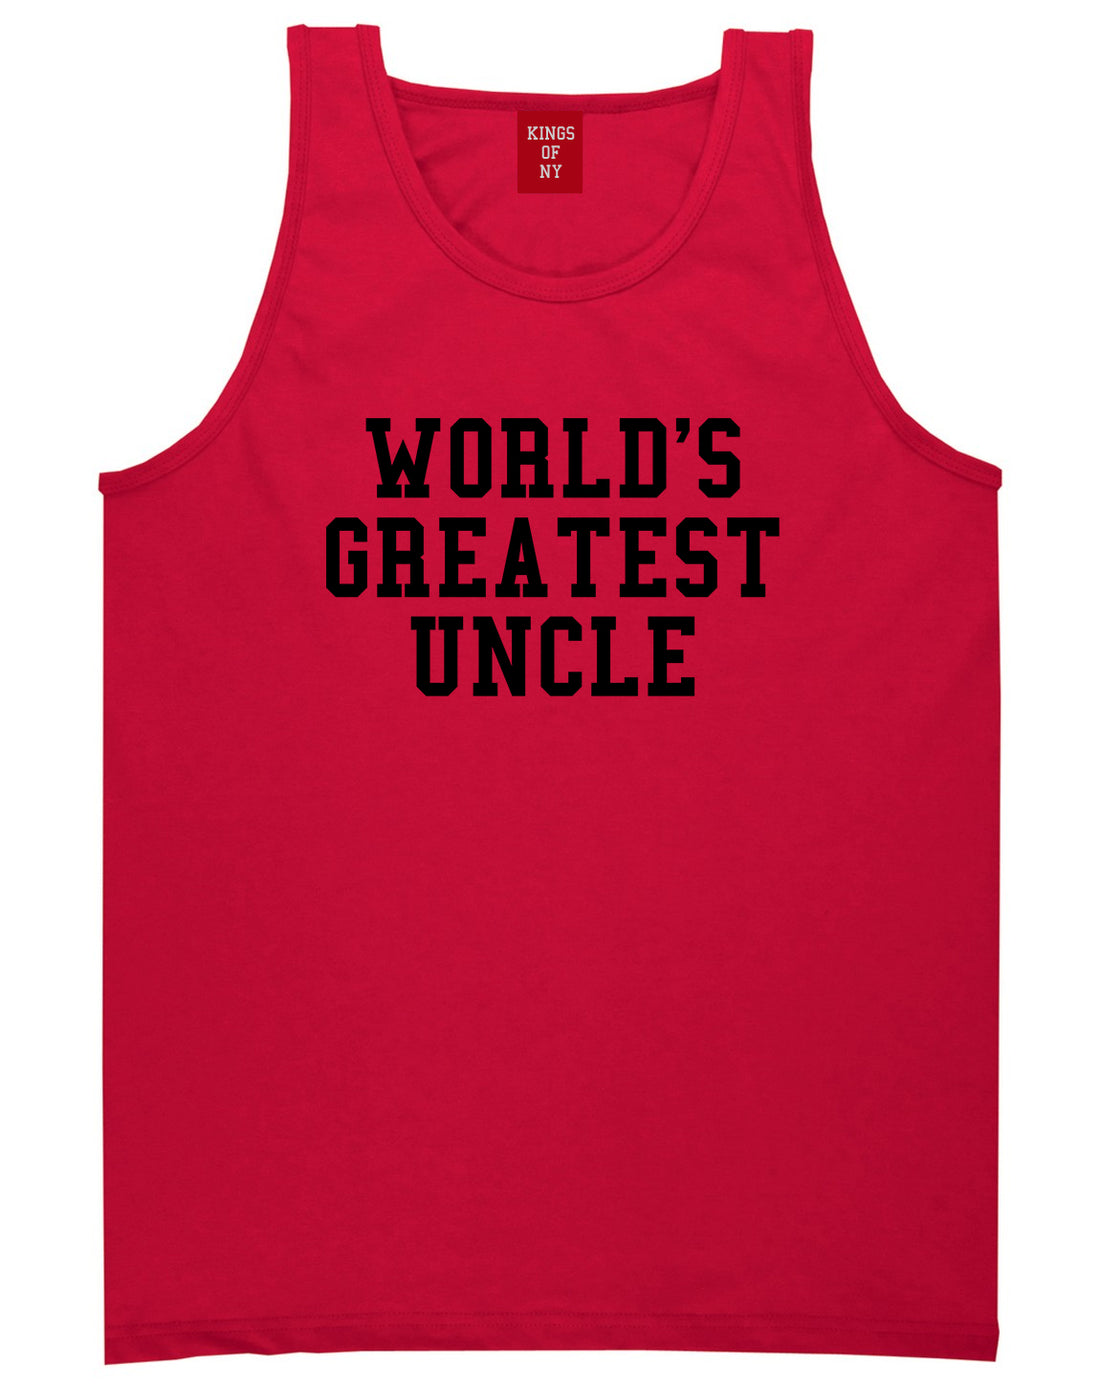 Worlds Greatest Uncle Birthday Gift Mens Tank Top T-Shirt Red